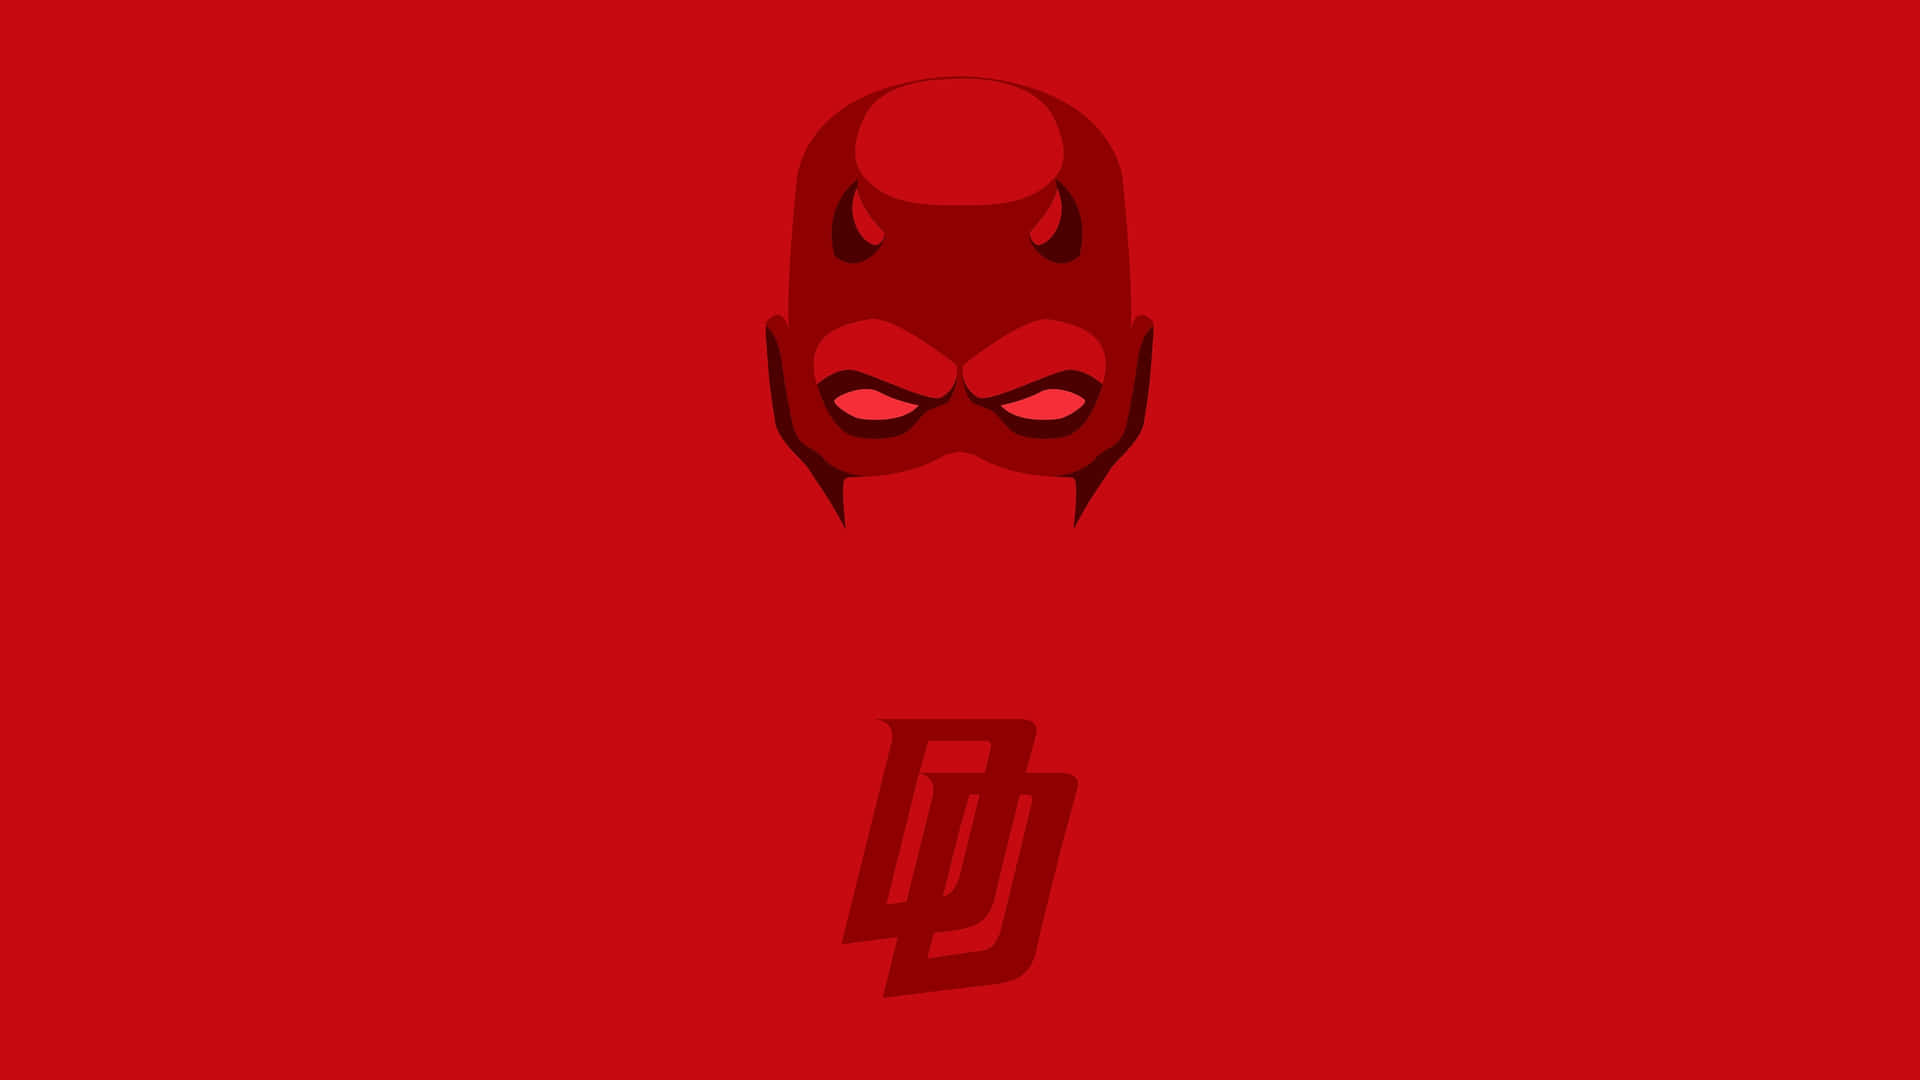 Blinded by Justice - Daredevil fights for the greater good.